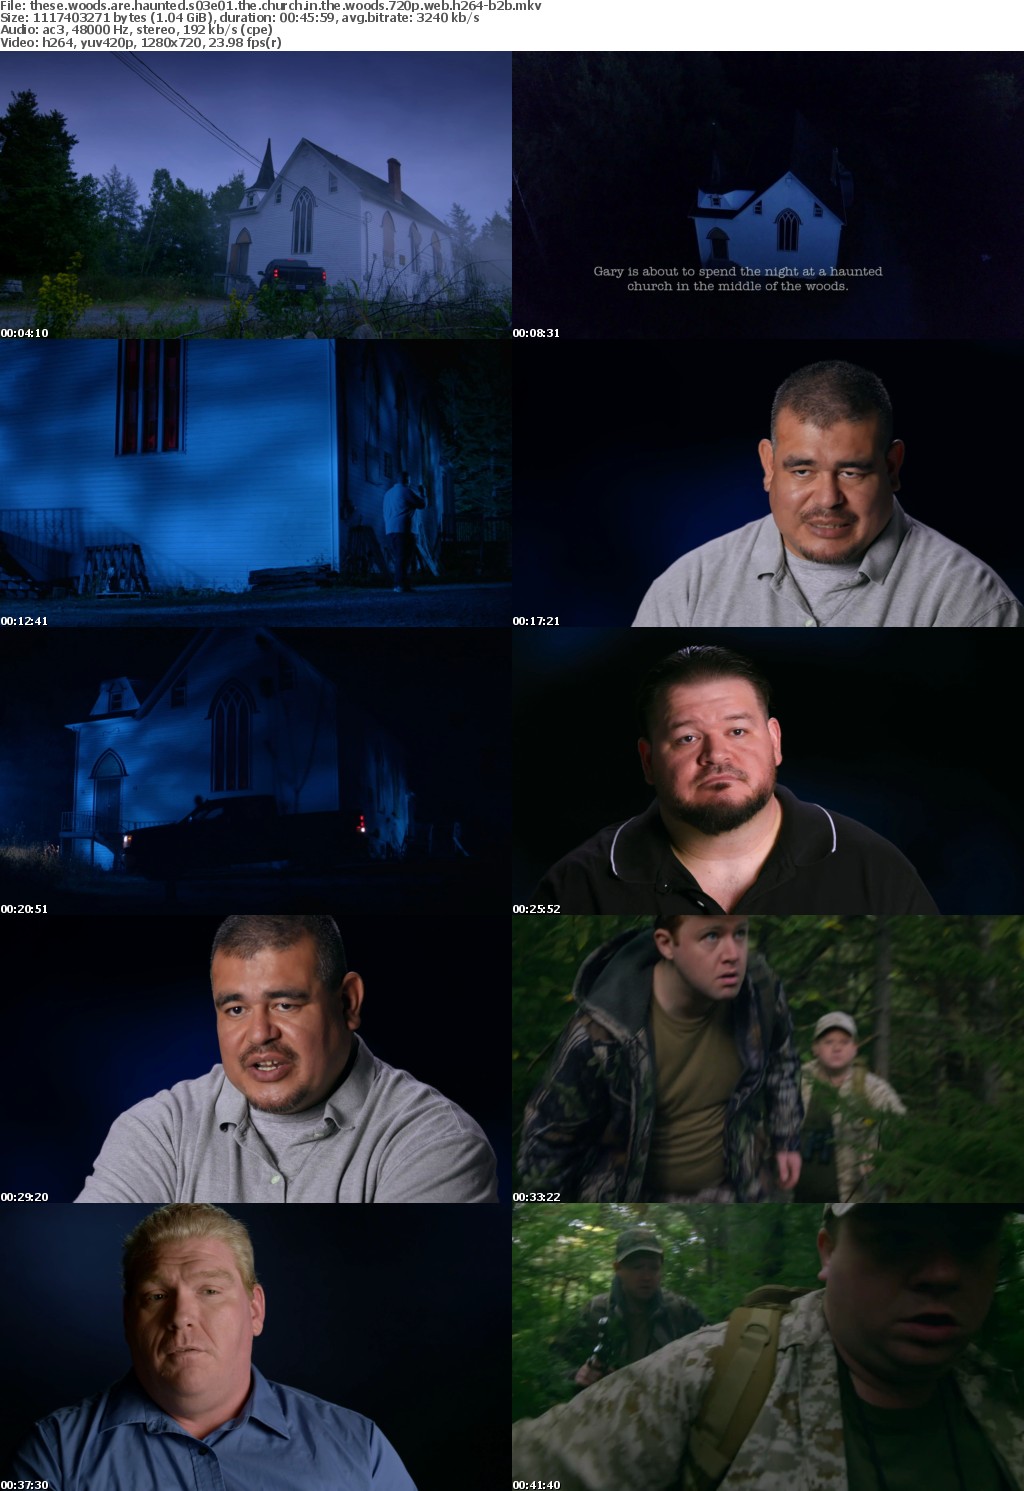 These Woods Are Haunted S03E01 The Church in the Woods 720p WEB h264-B2B